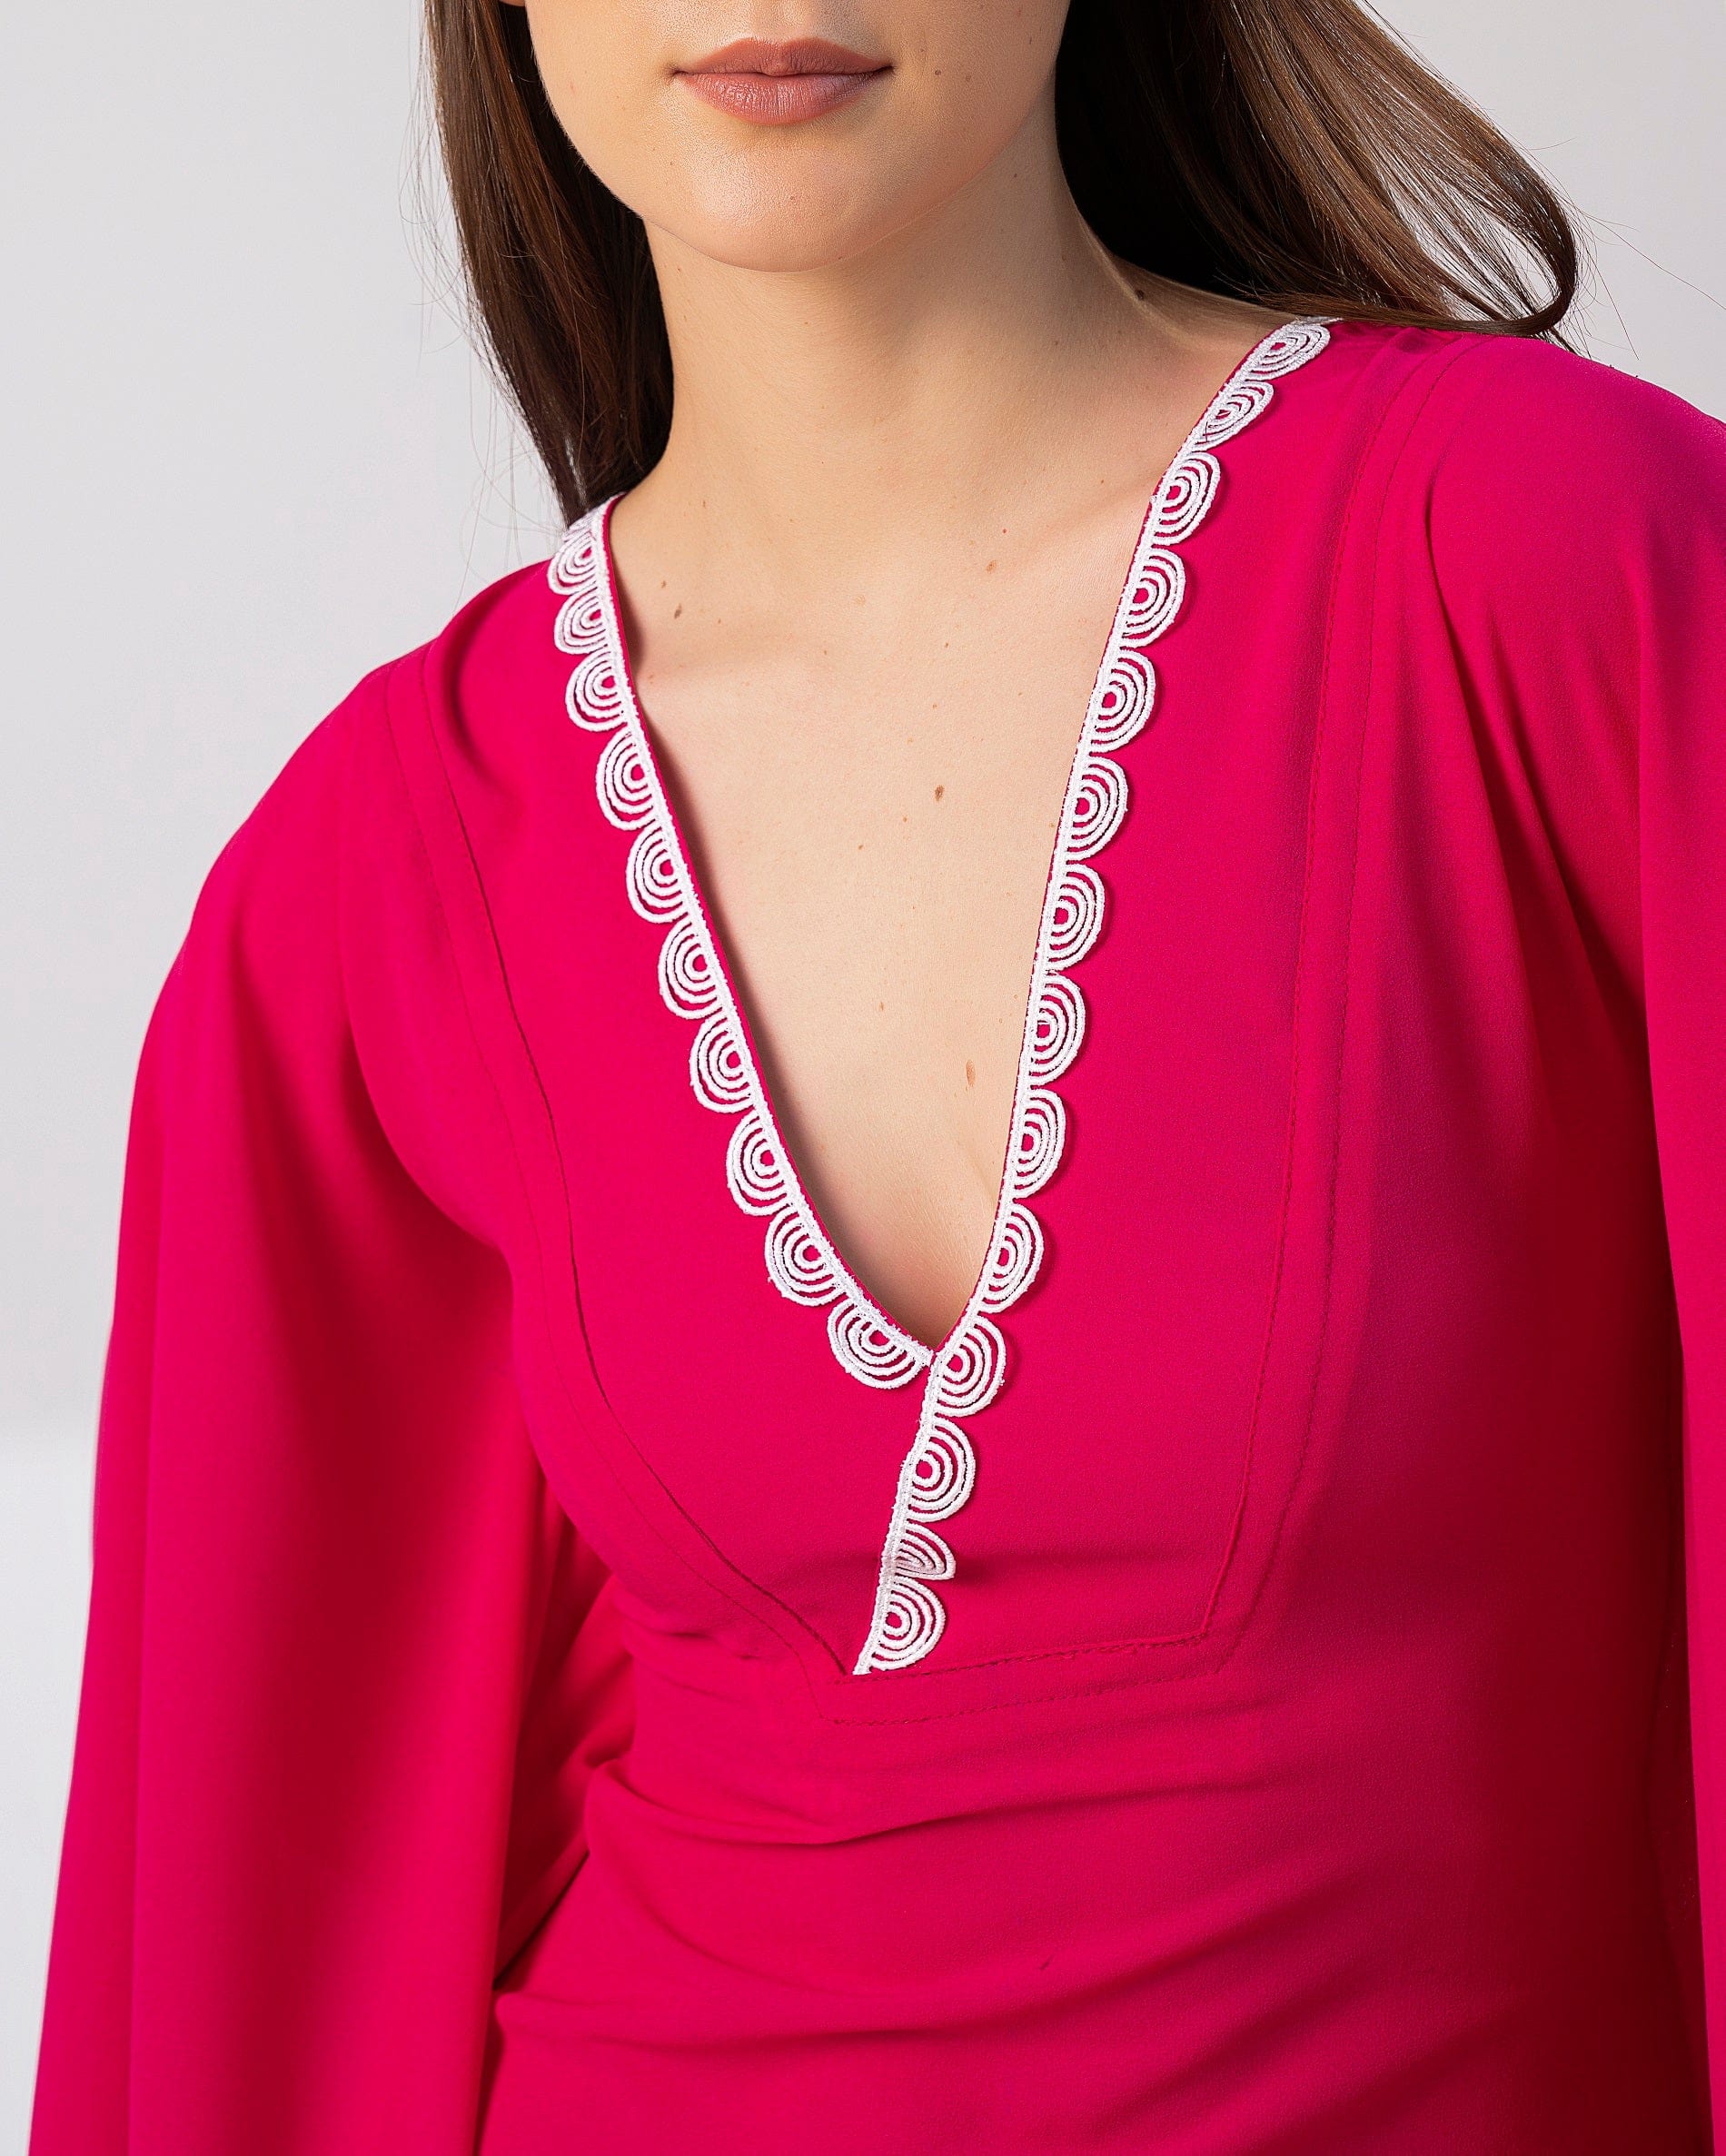 This flowy pink short kaftan dress is made of soft georgette lycra and is perfect for any occasion, whether it's a casual day out or resort party wear.